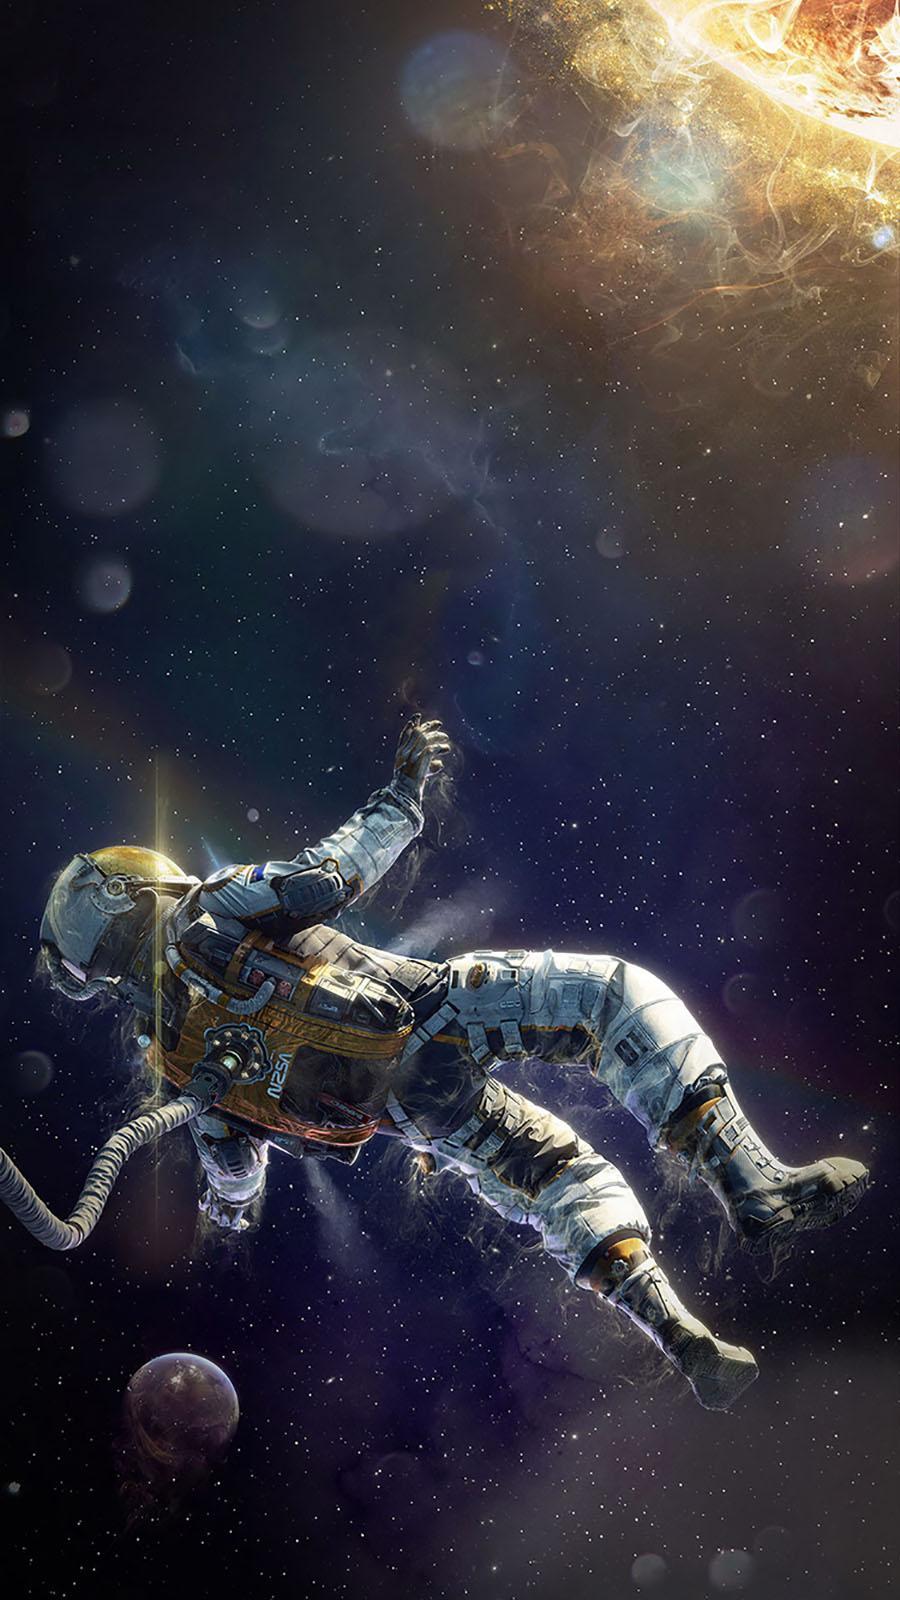 space wallpaper android,cg artwork,outer space,space,illustration,astronaut